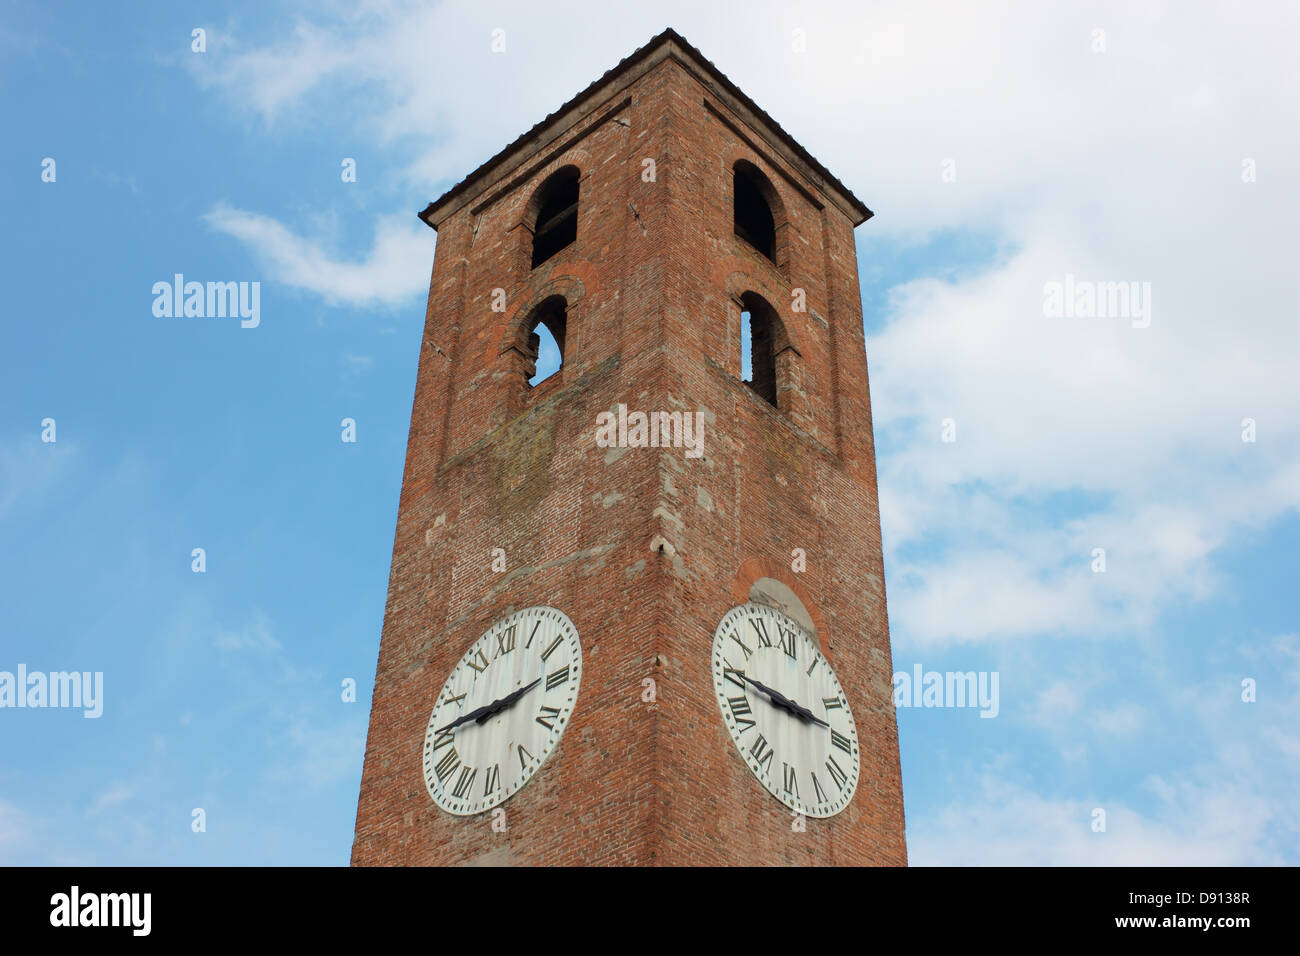 Antique clock tower in Lucca, Italy on blue sky background with white clouds. Stock Photo